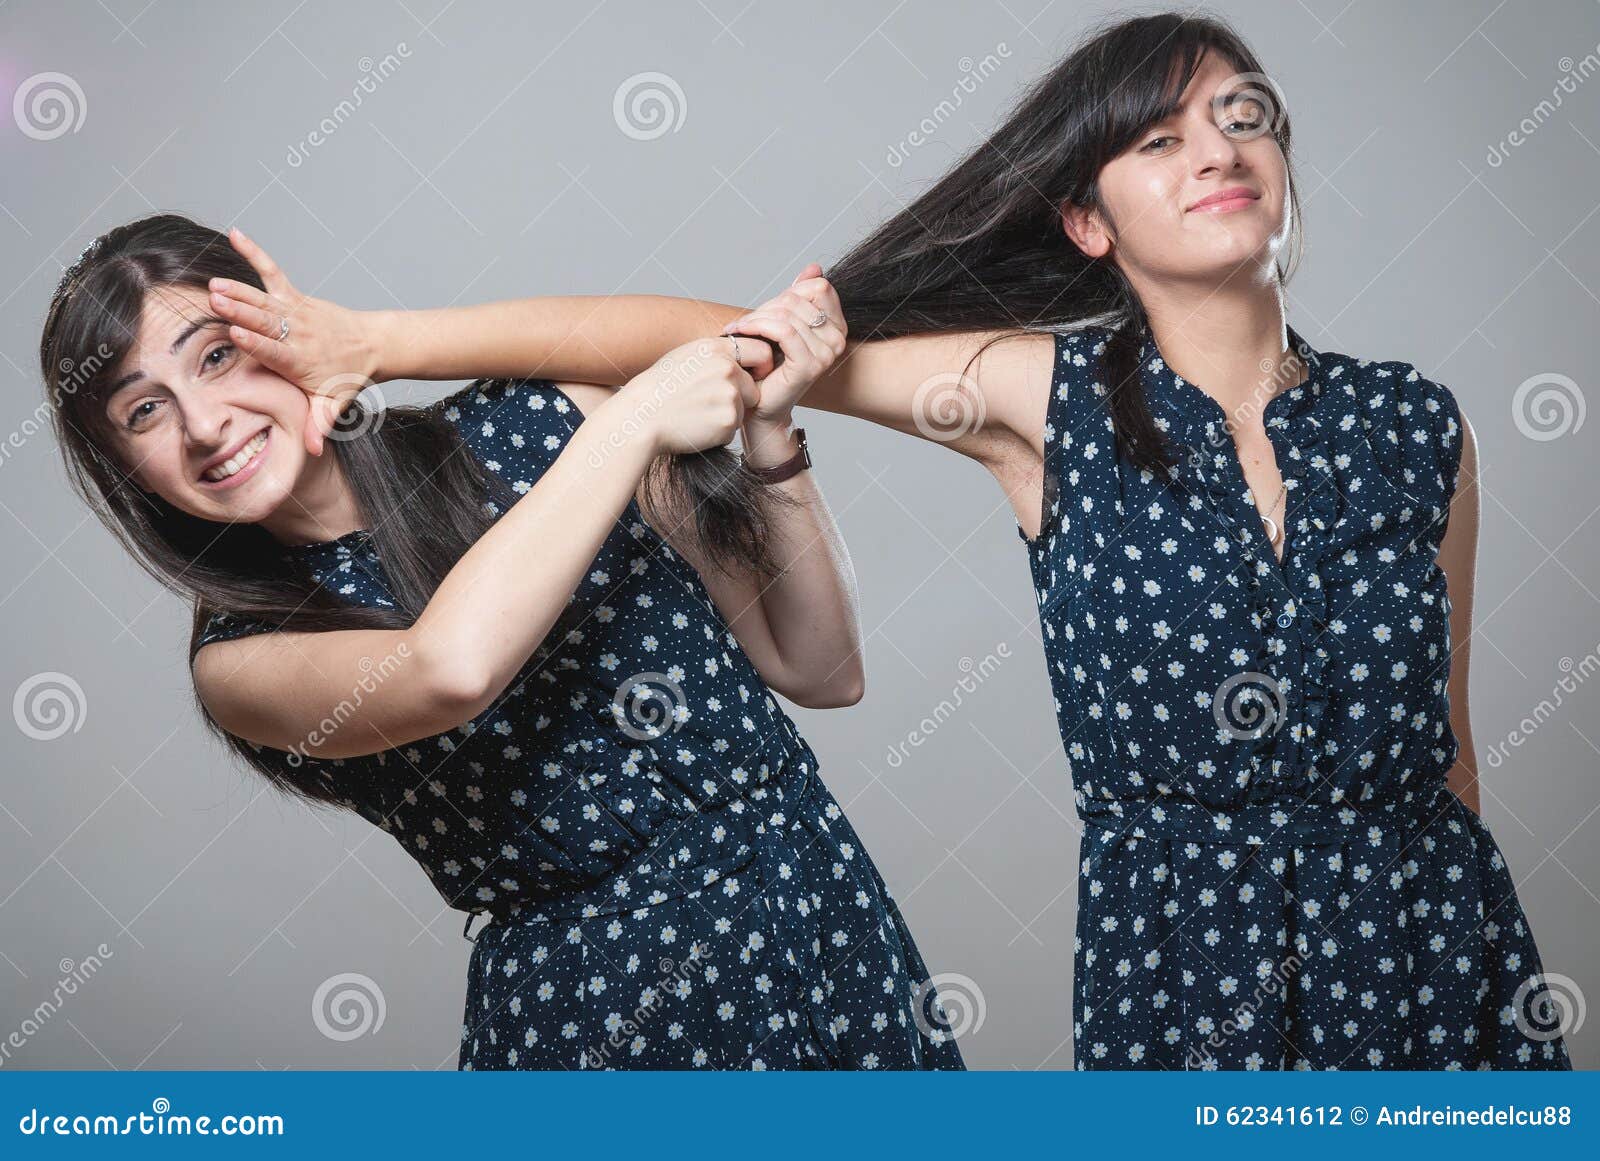 Two sisters pulling hair stock photo. Image of arguing - 62341612